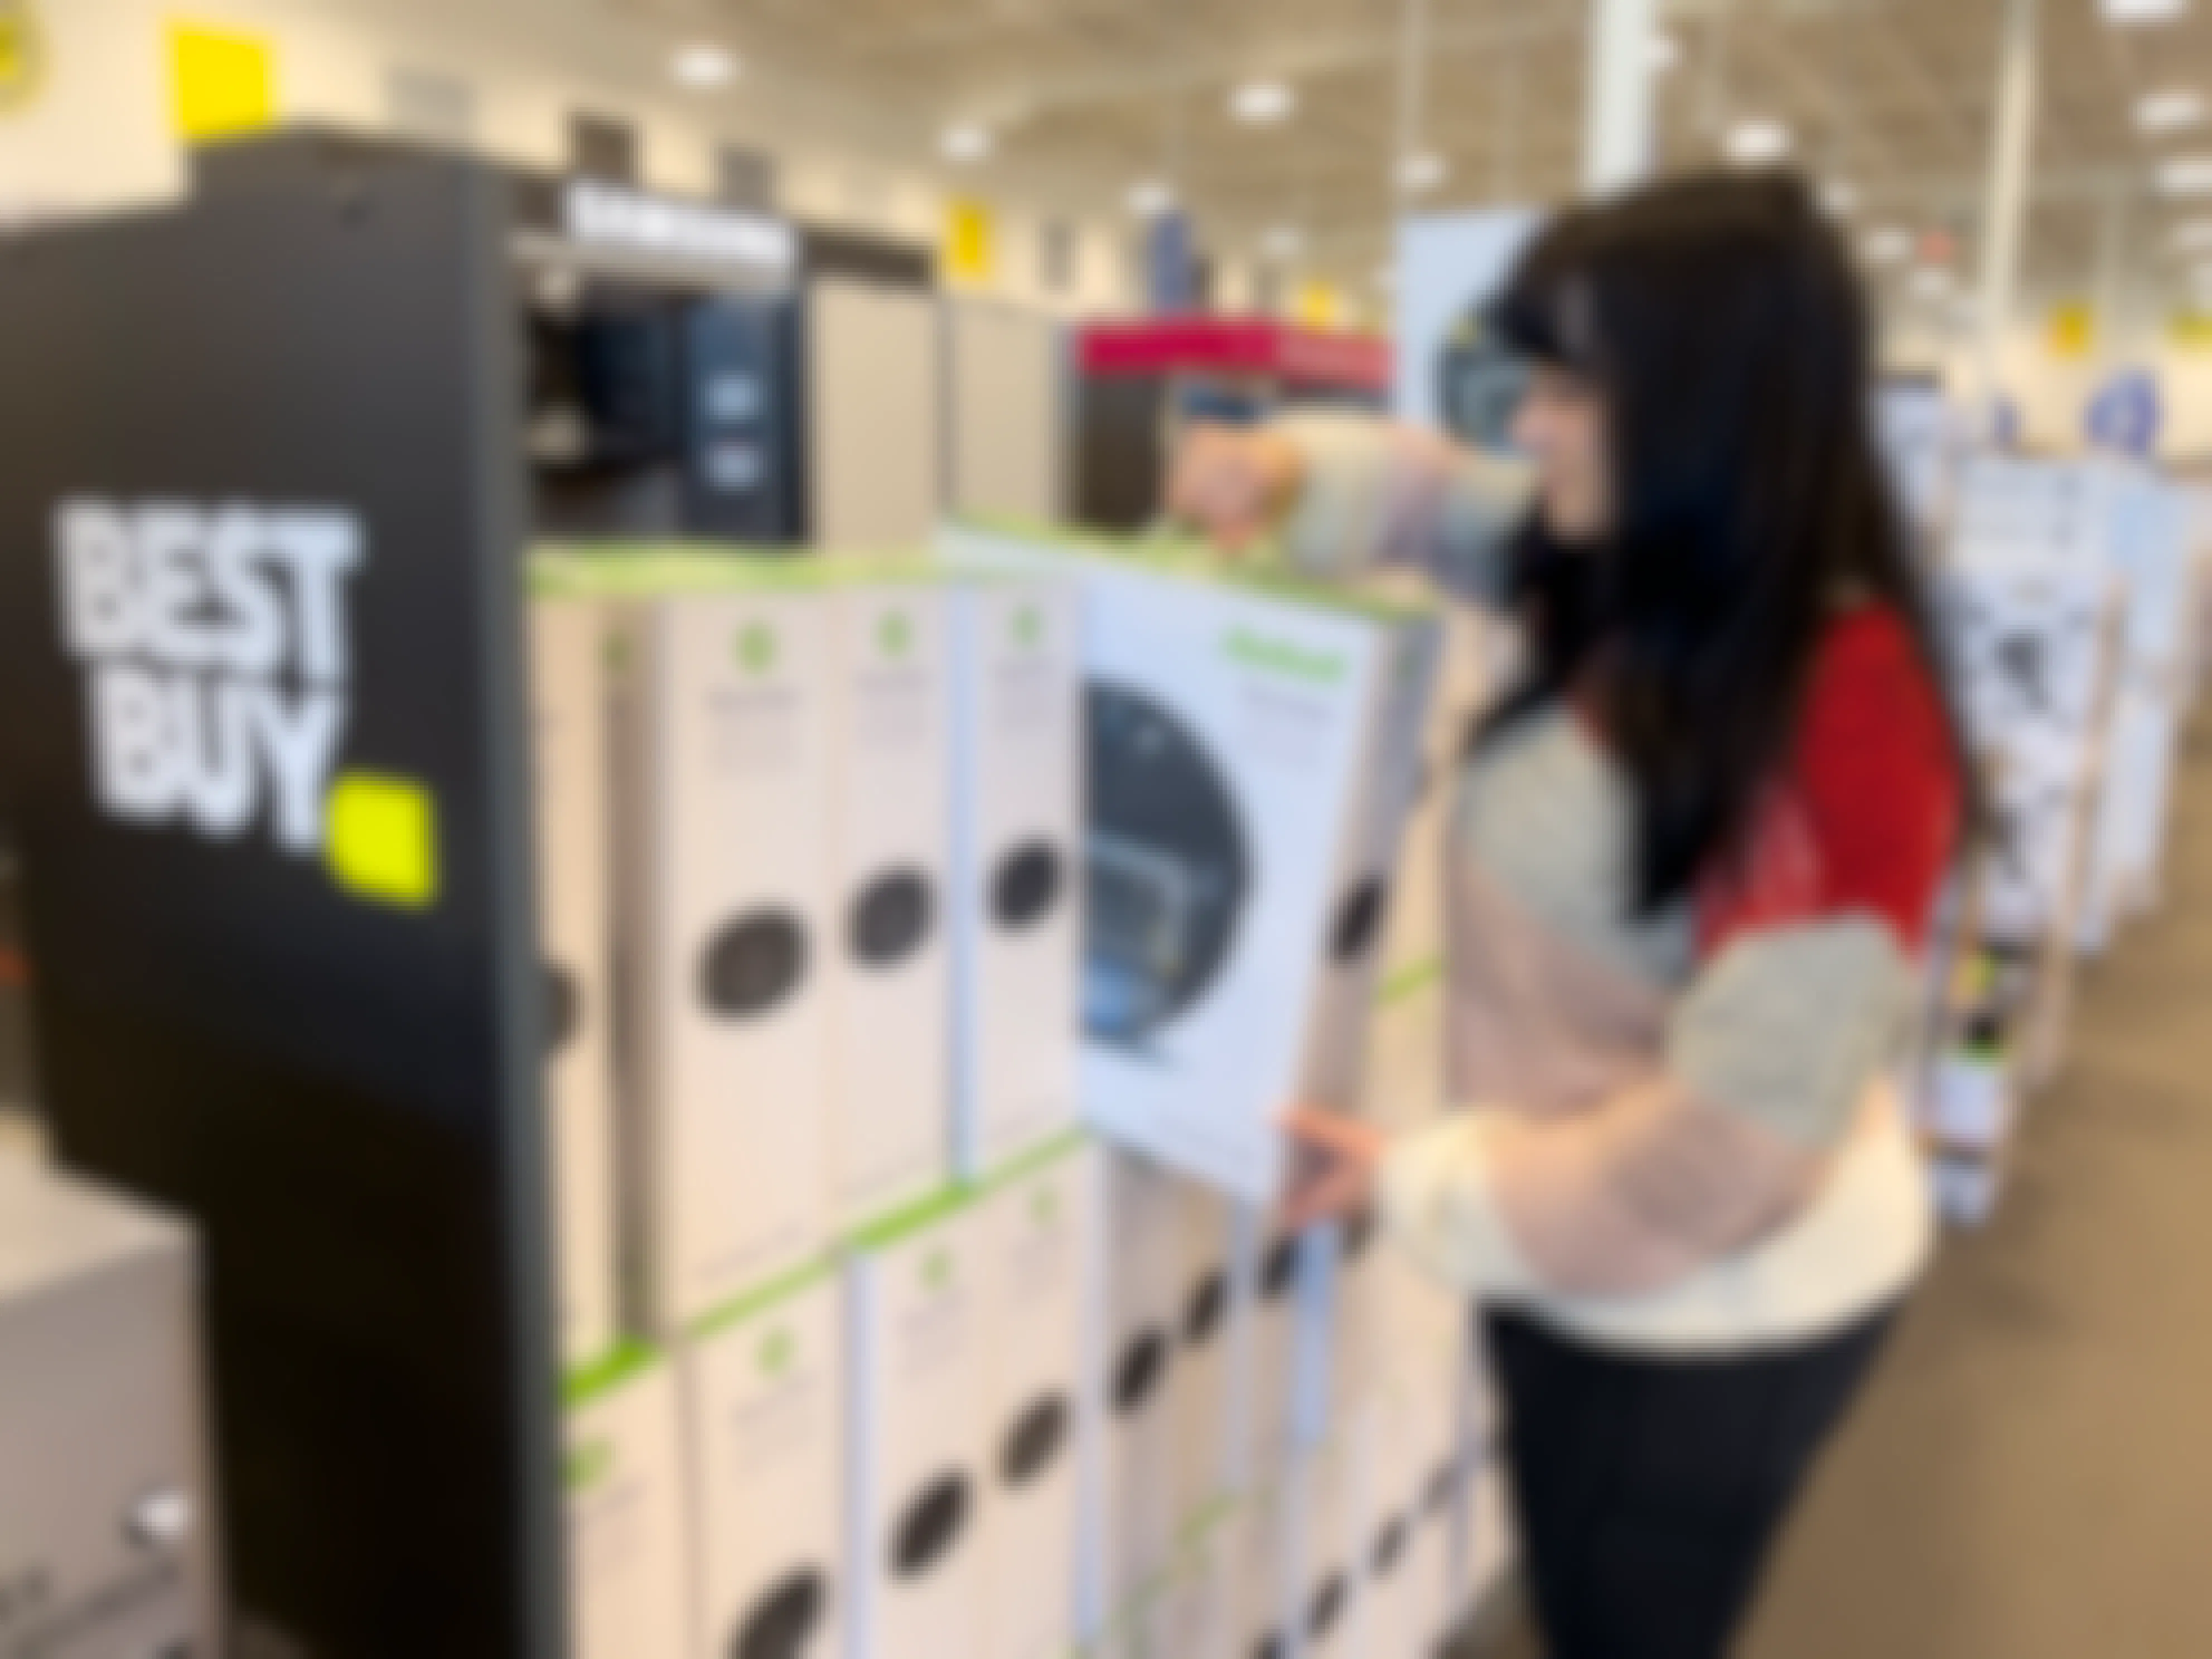 A woman pulling a roomba vacuum from a display at Best Buy.